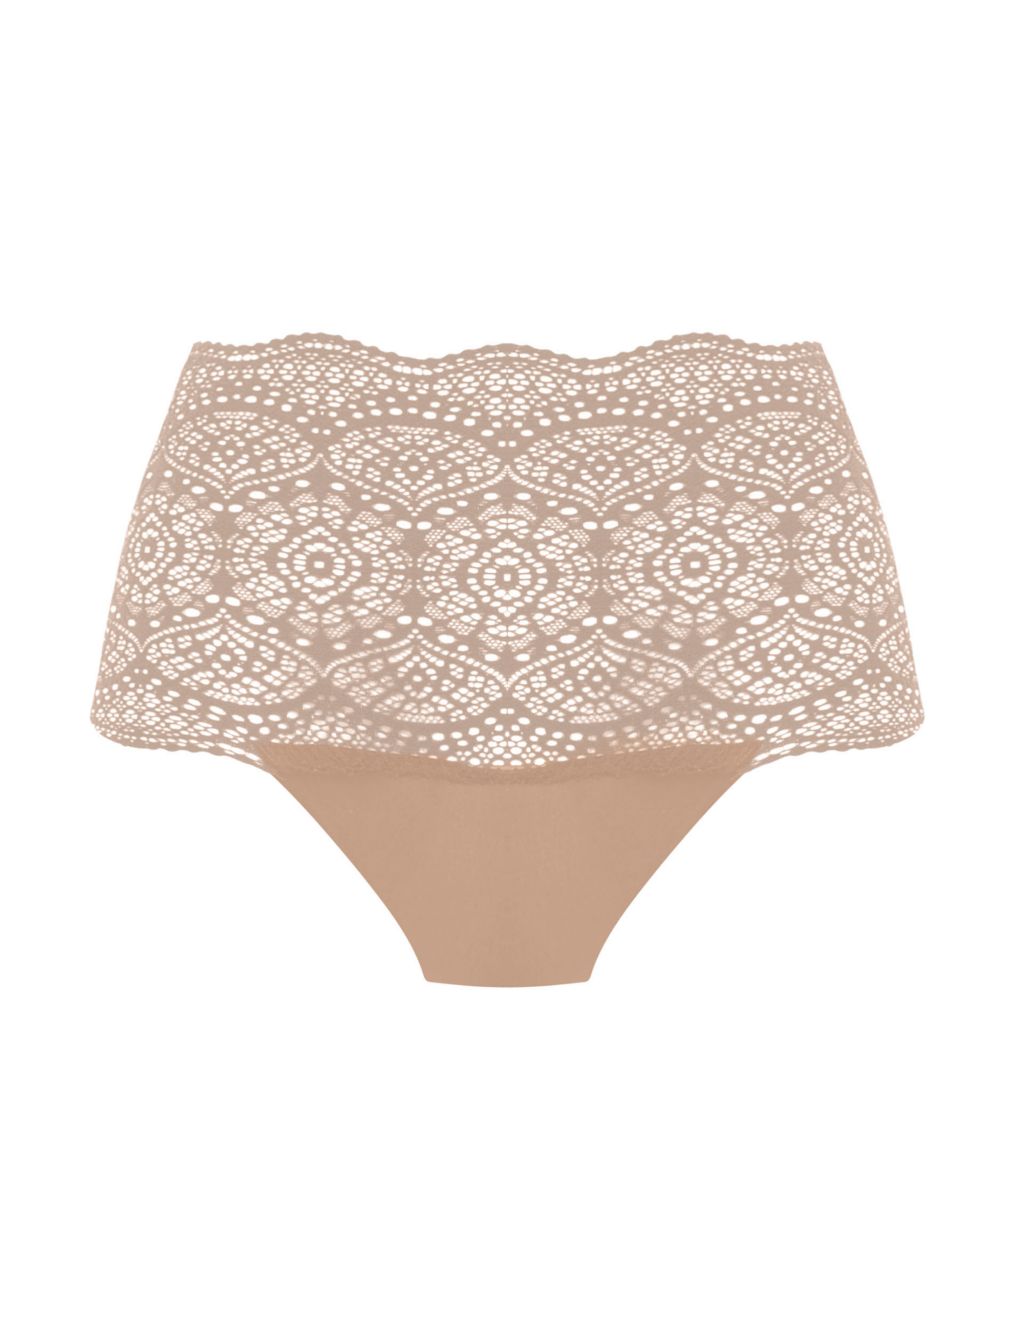 Lace Ease High Waisted Full Briefs image 2